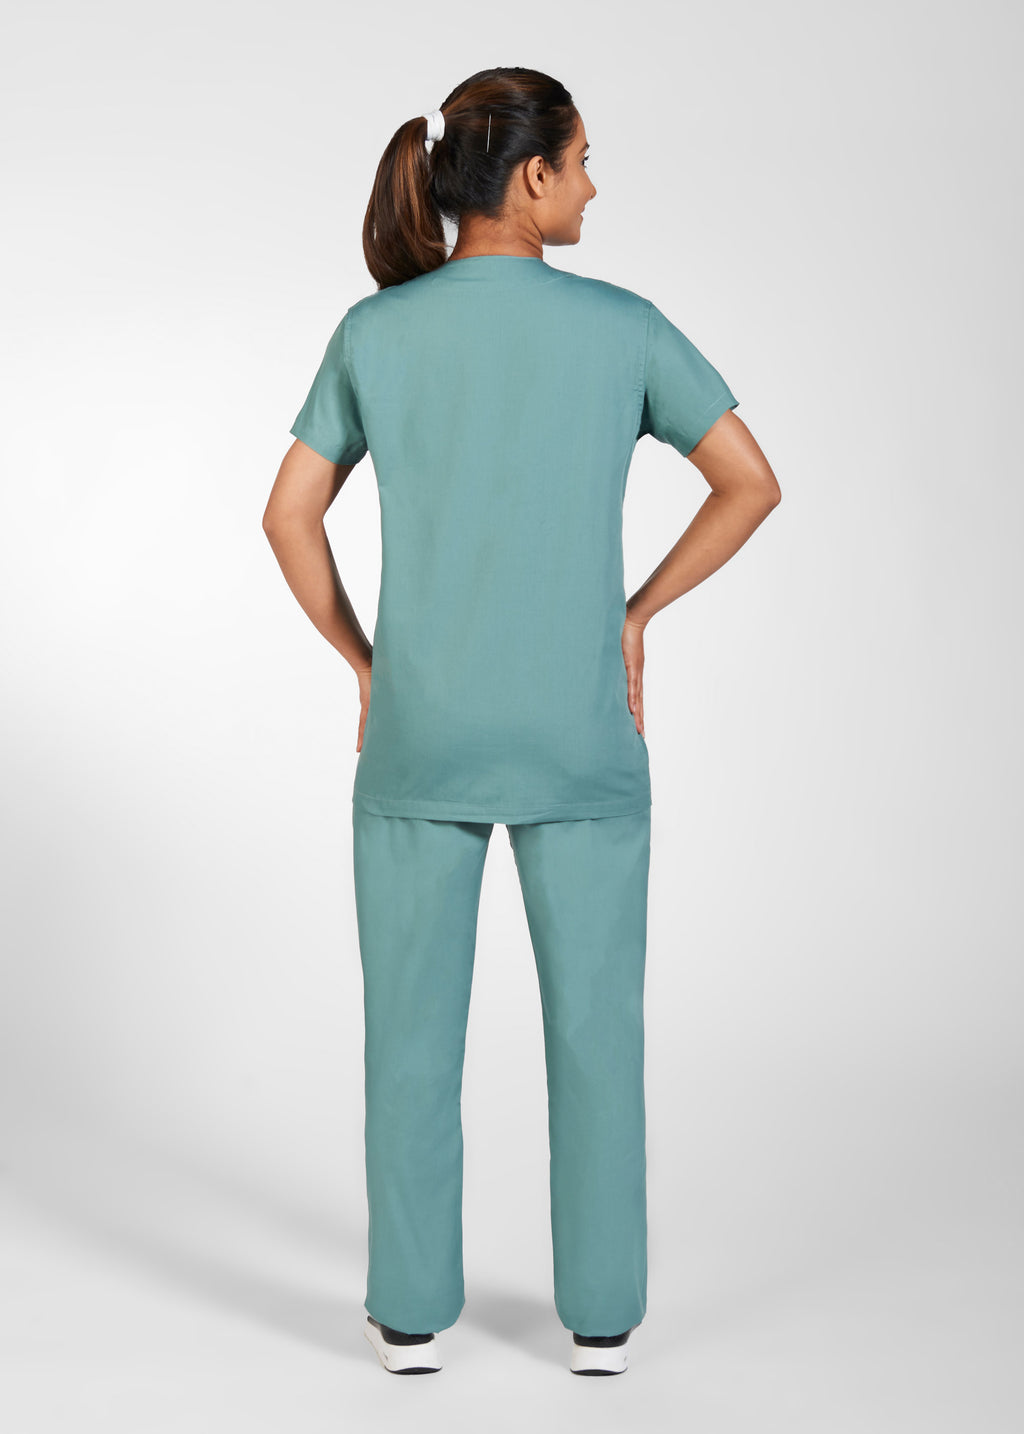 Product - One Pocket MOBB Scrub Top Reversible